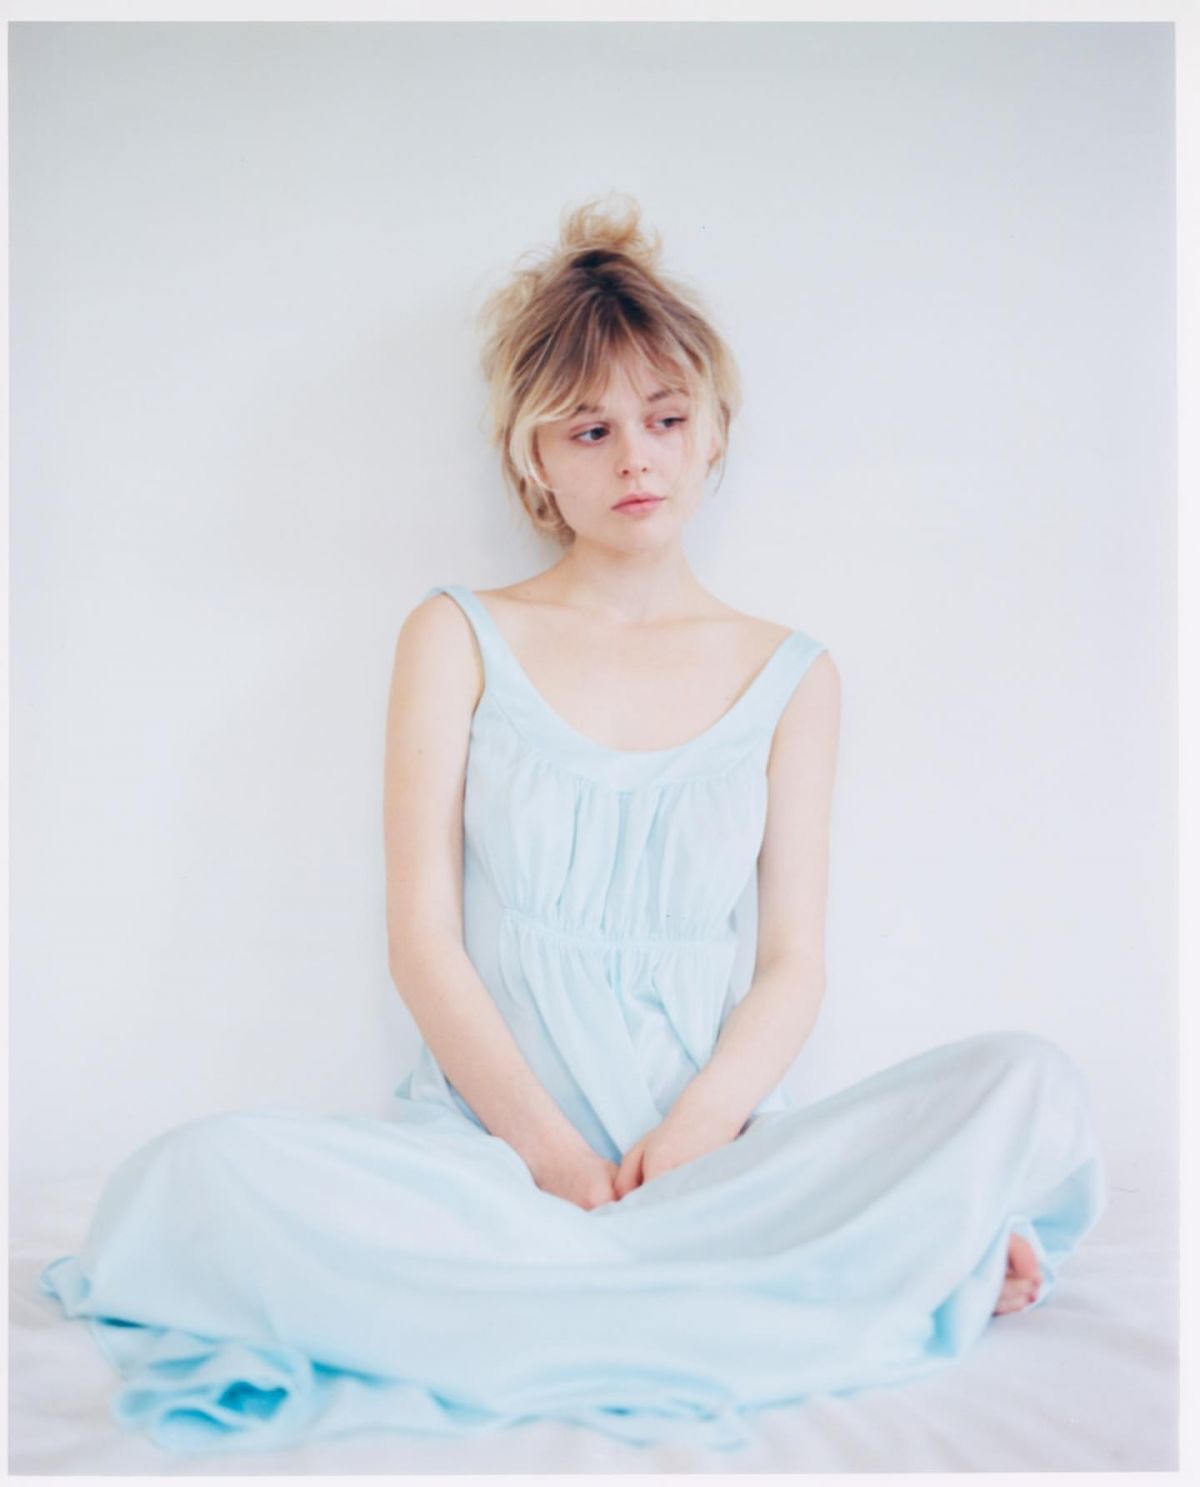 Emily Alyn Lind at a Photoshoot, October 2020 Issue 1